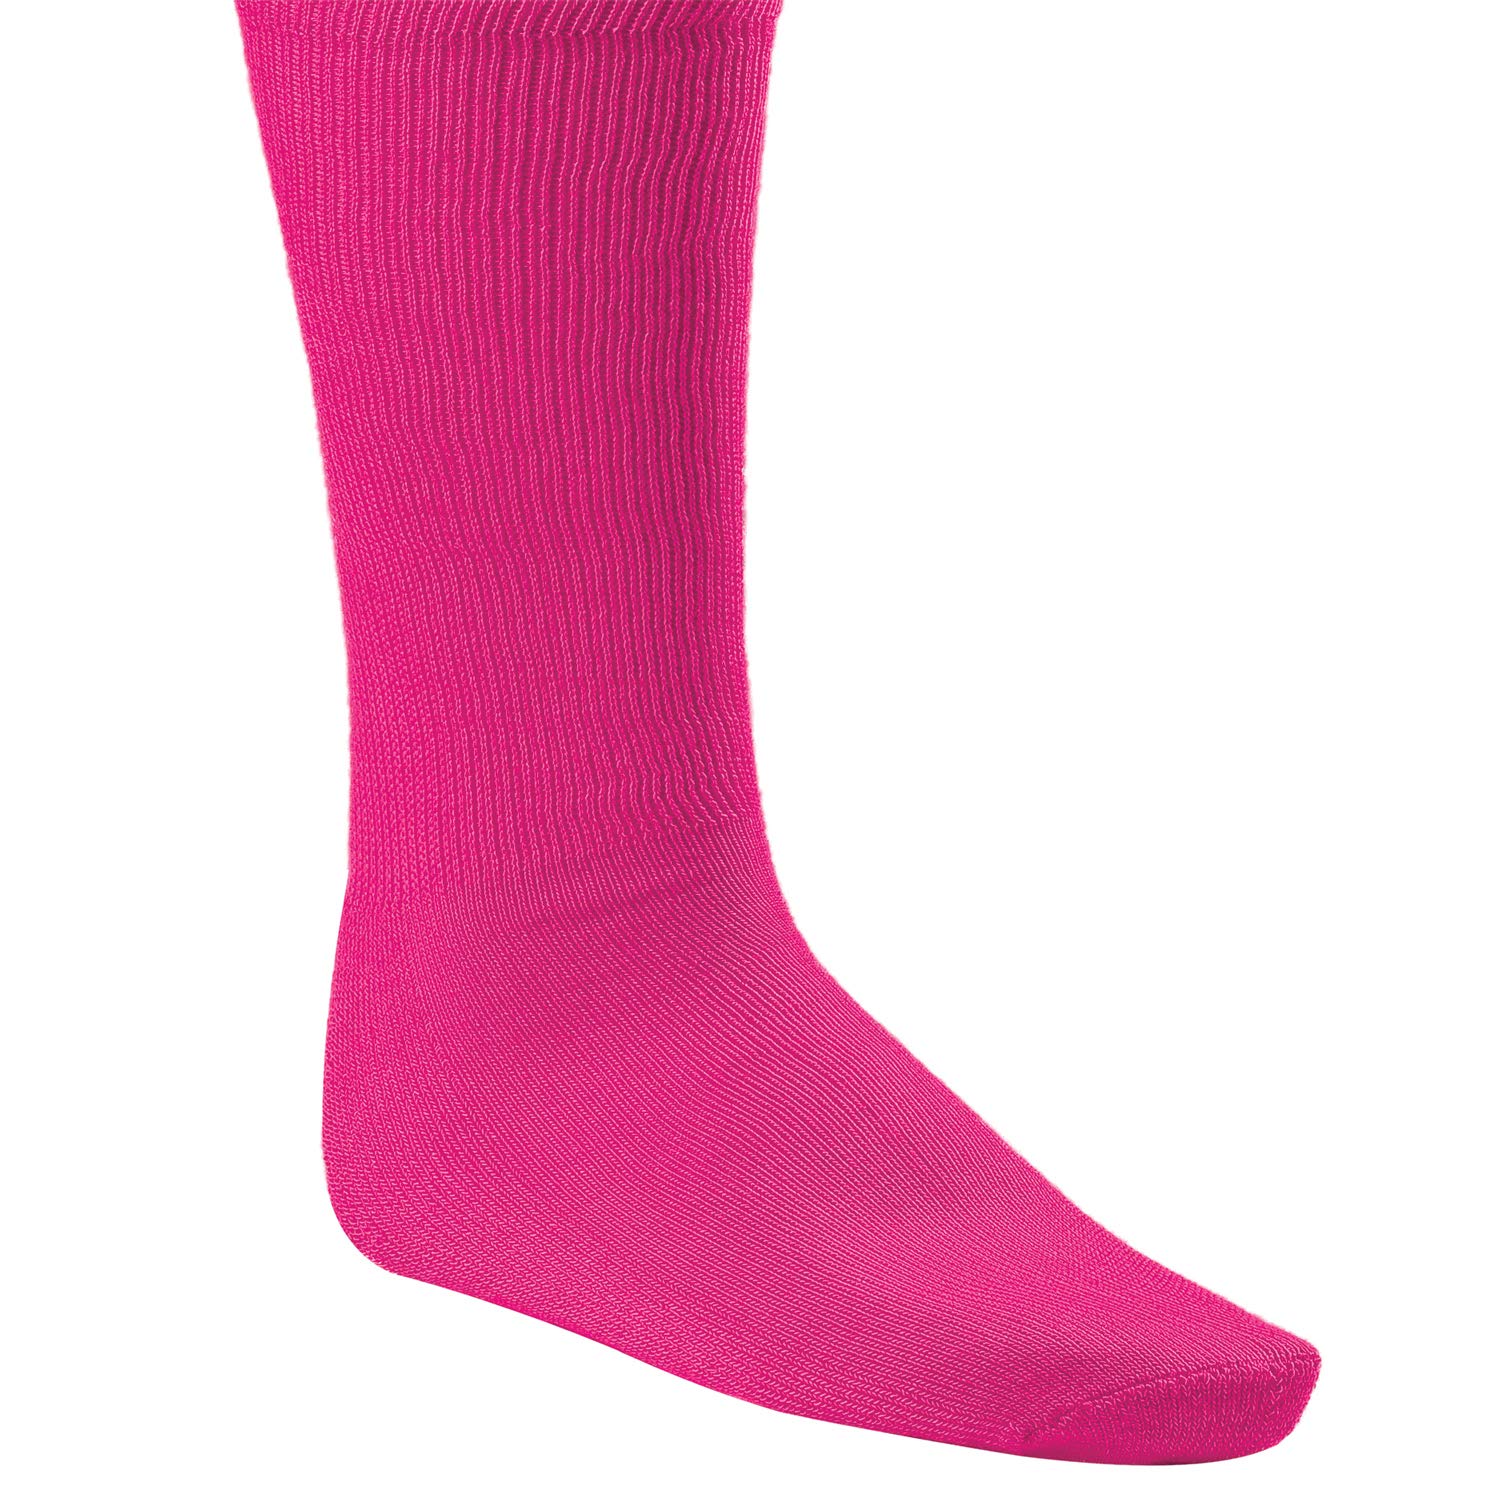 Champion Sports Rhino All Sport Athletic Socks - Multiple Sizes and Colors